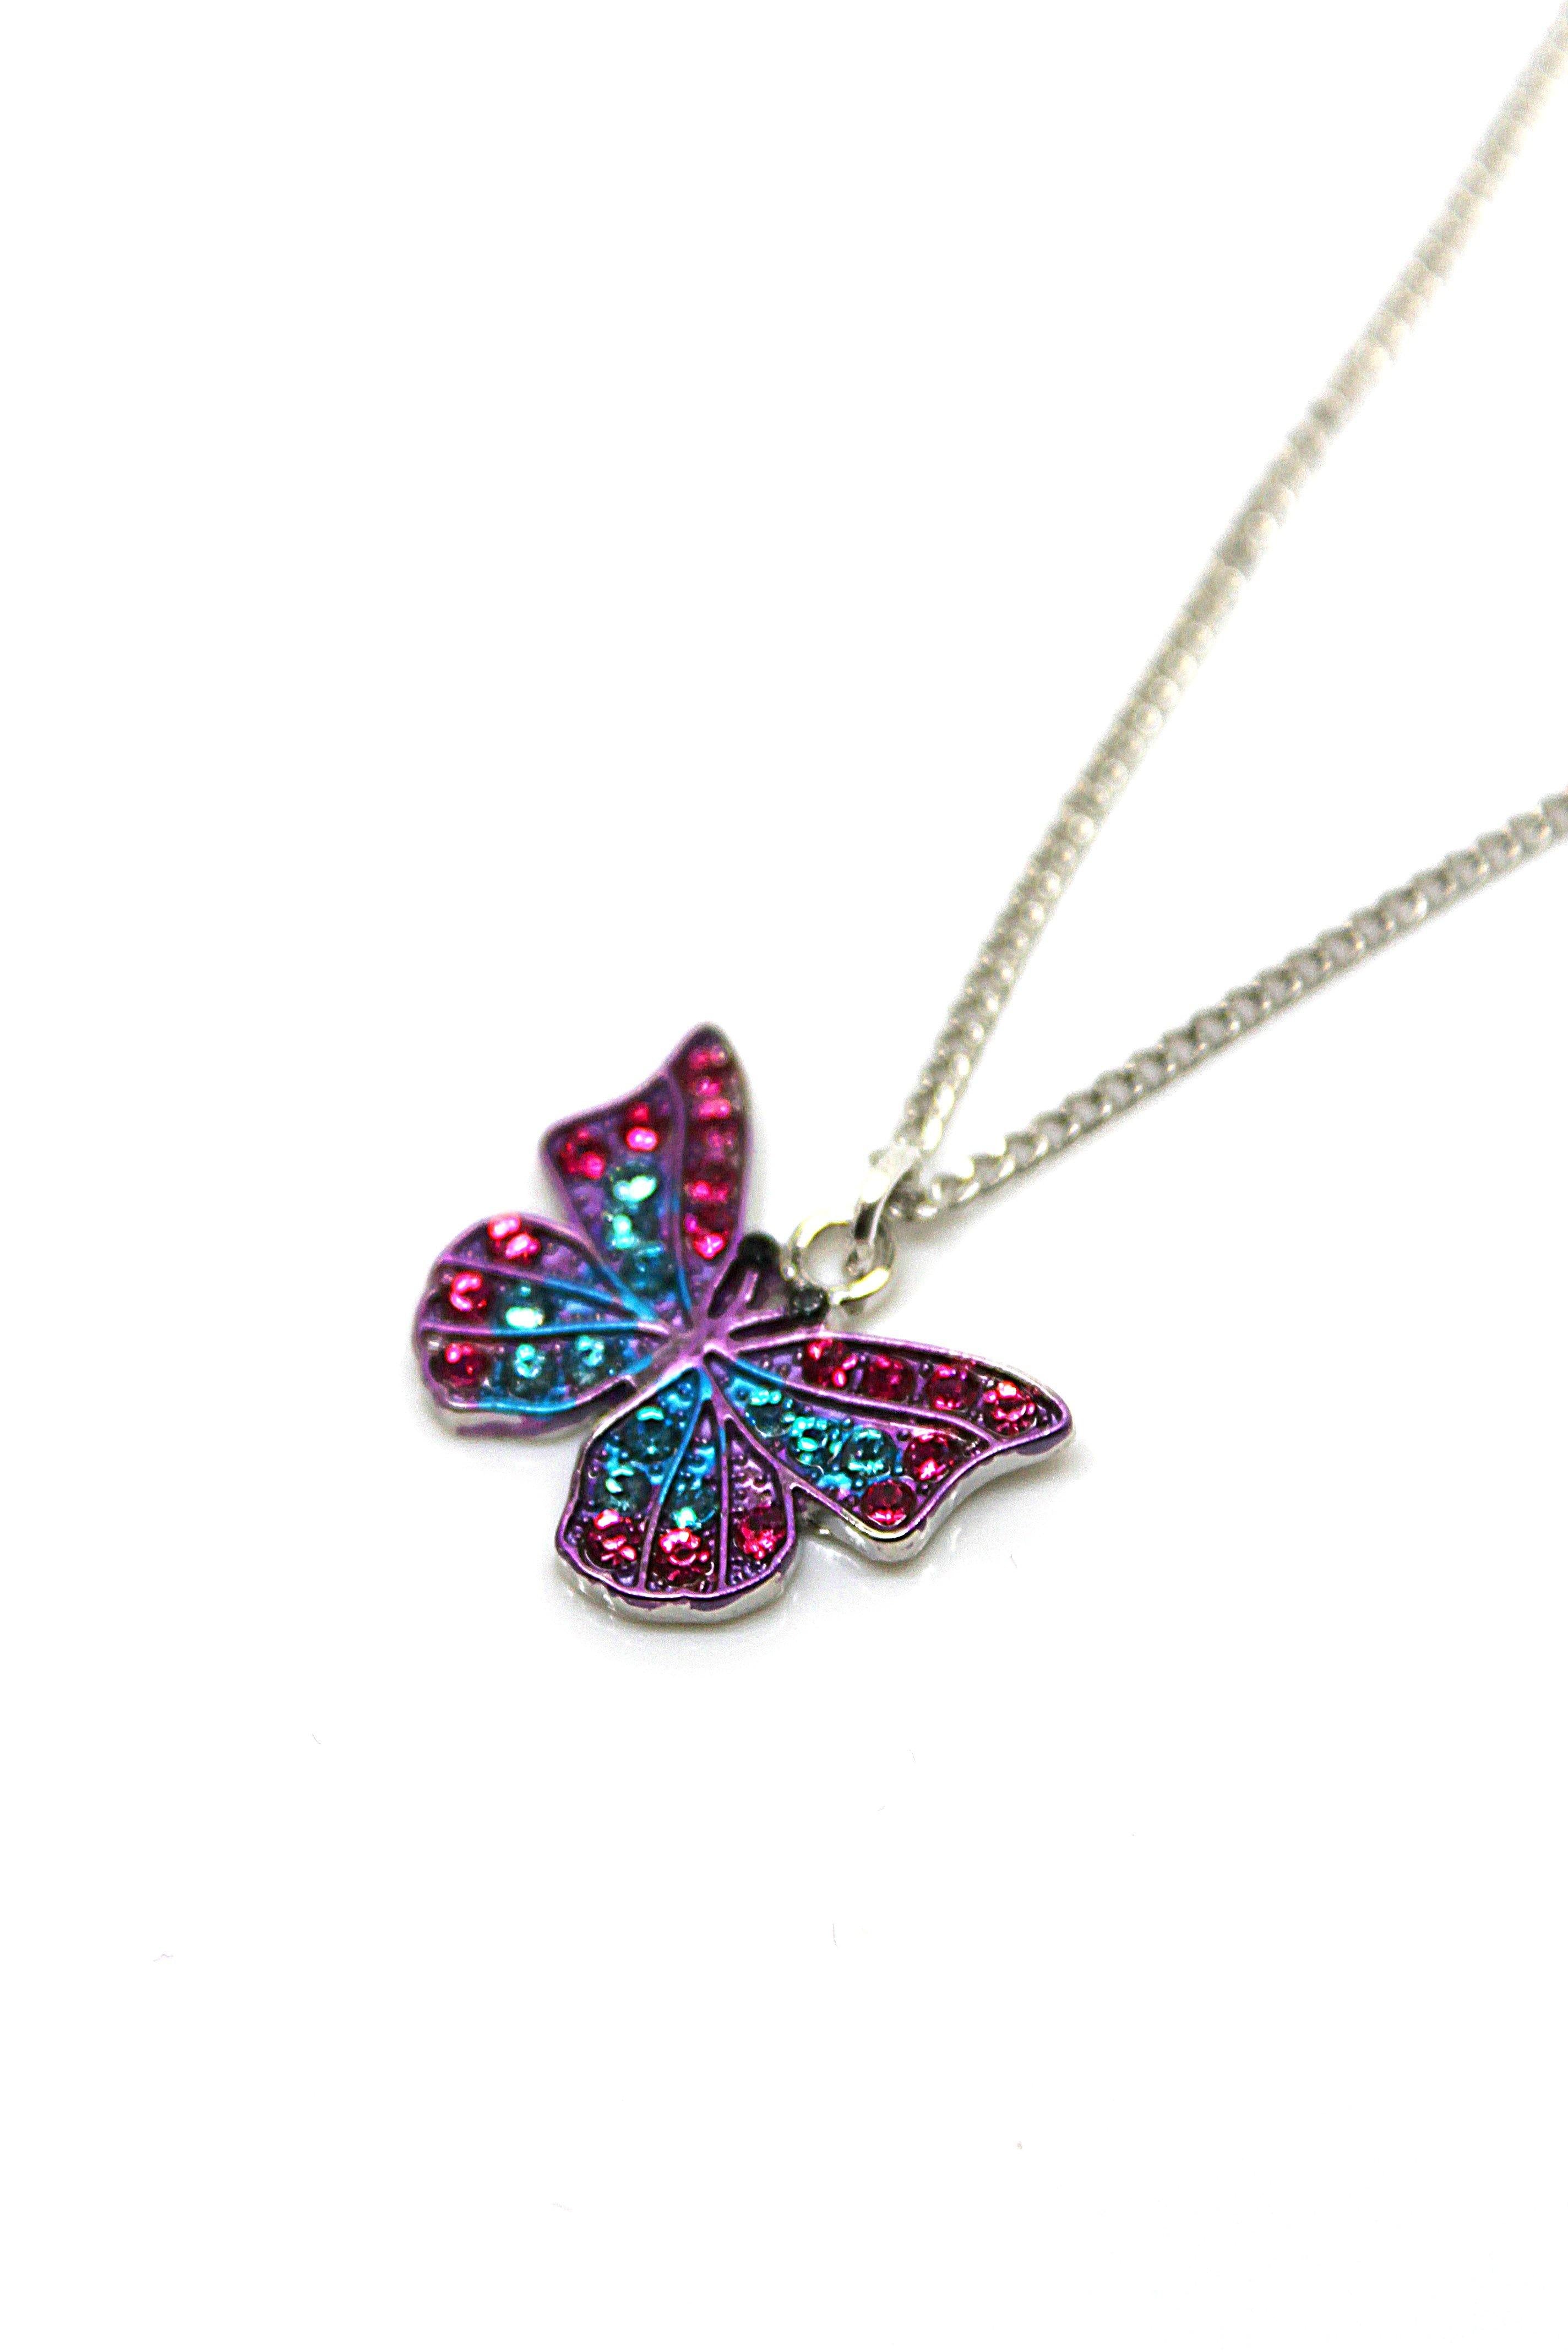 Butterfly Pink & Blue Necklace - Wildtouch - Wildtouch